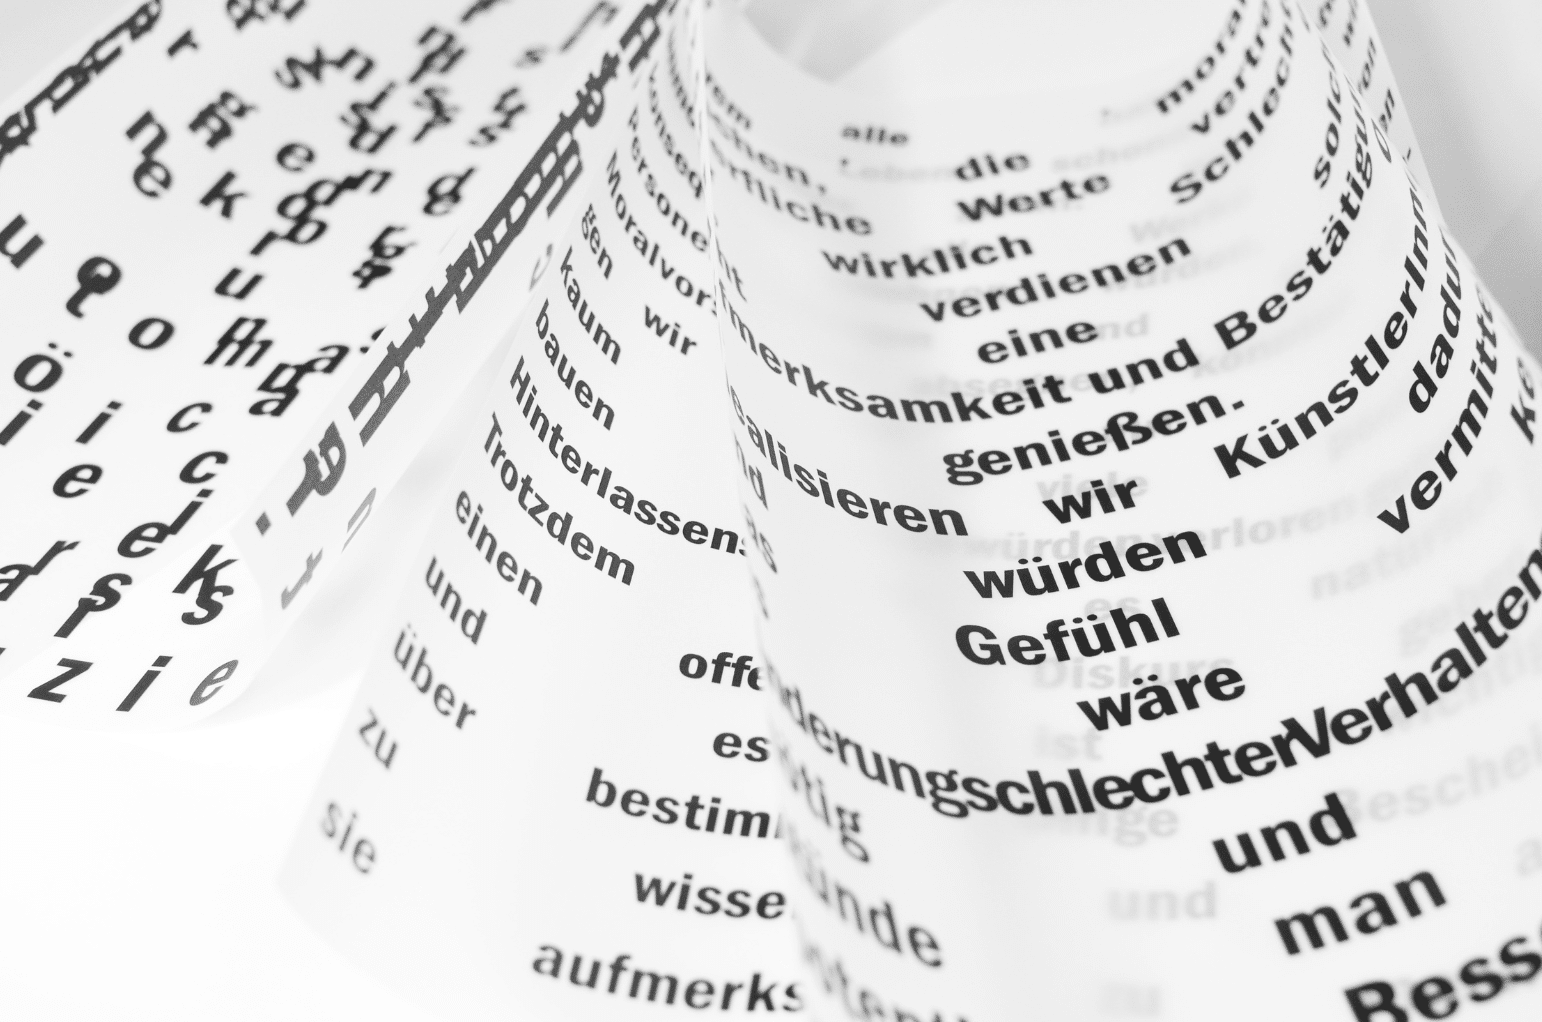 Declension German Ding - All cases of the noun, plural, article, ding  meaning 